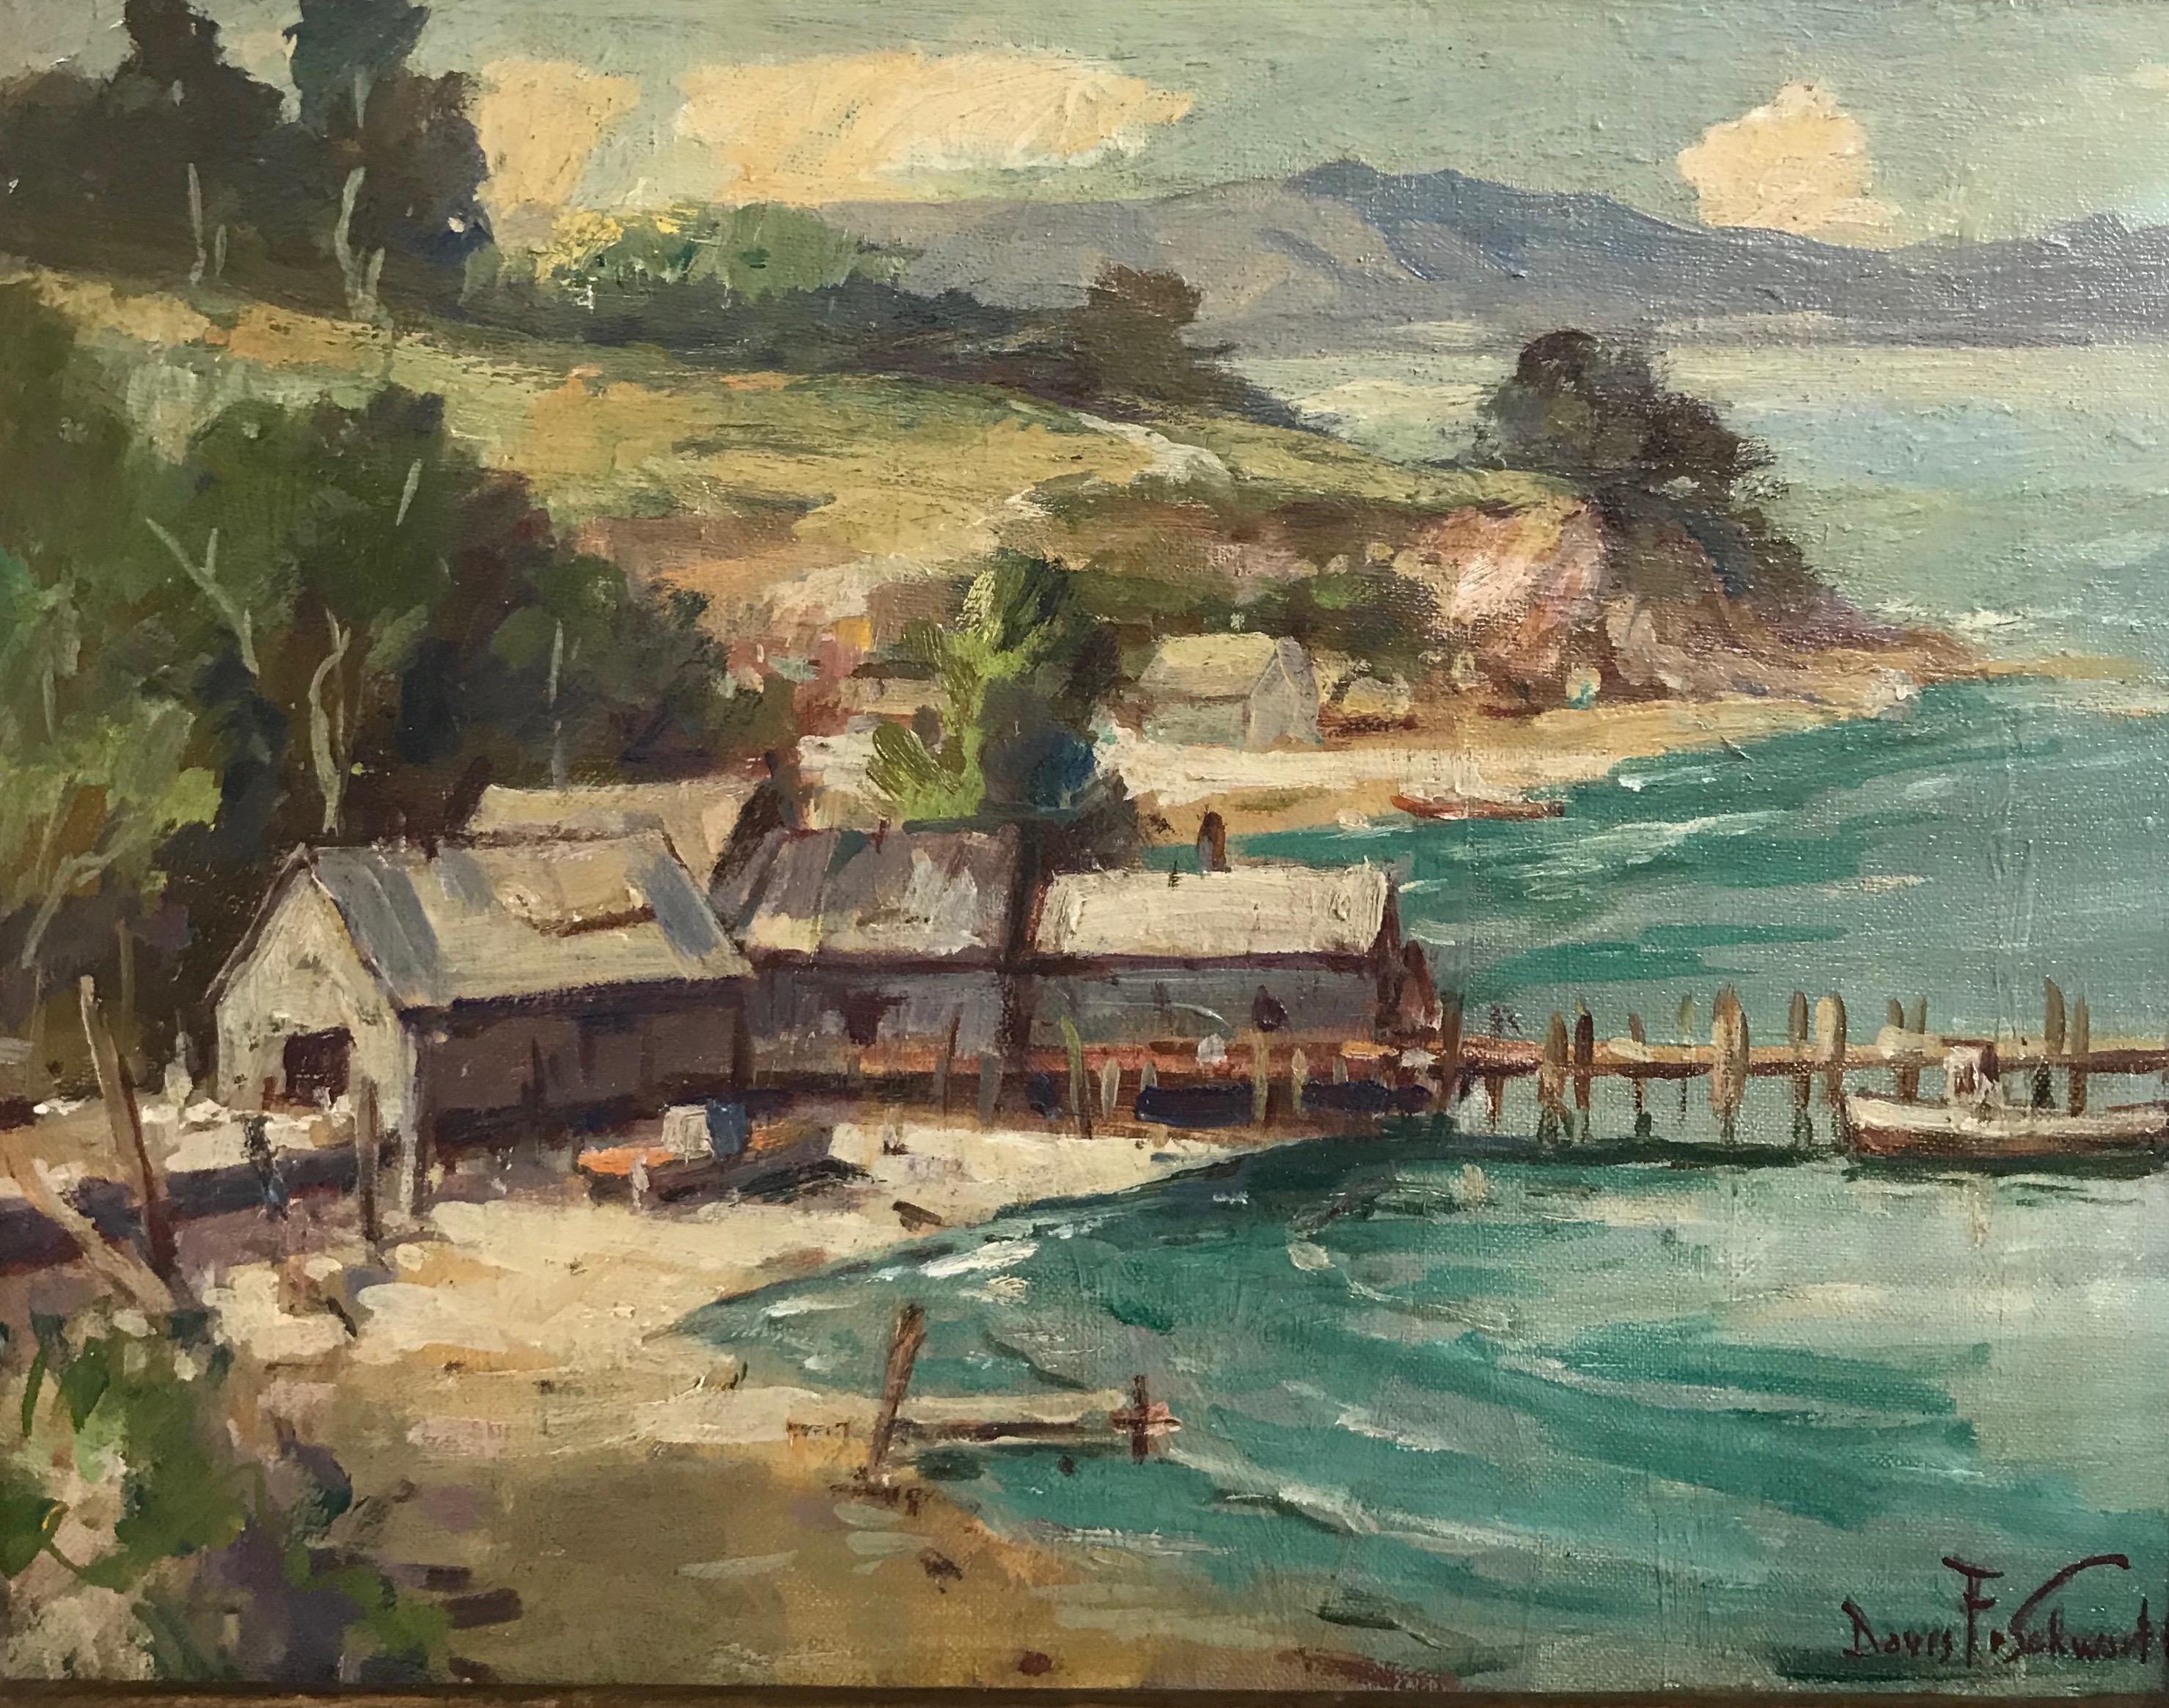 Coastal seascape painting of China Camp in Marin County California by Davis Francis Schwartz (b.1879-d.1969).
Oil on canvas in painted wood frame, signed lower right. 
American, early to mid 20th century.

Davis Schwartz was a landscape painter